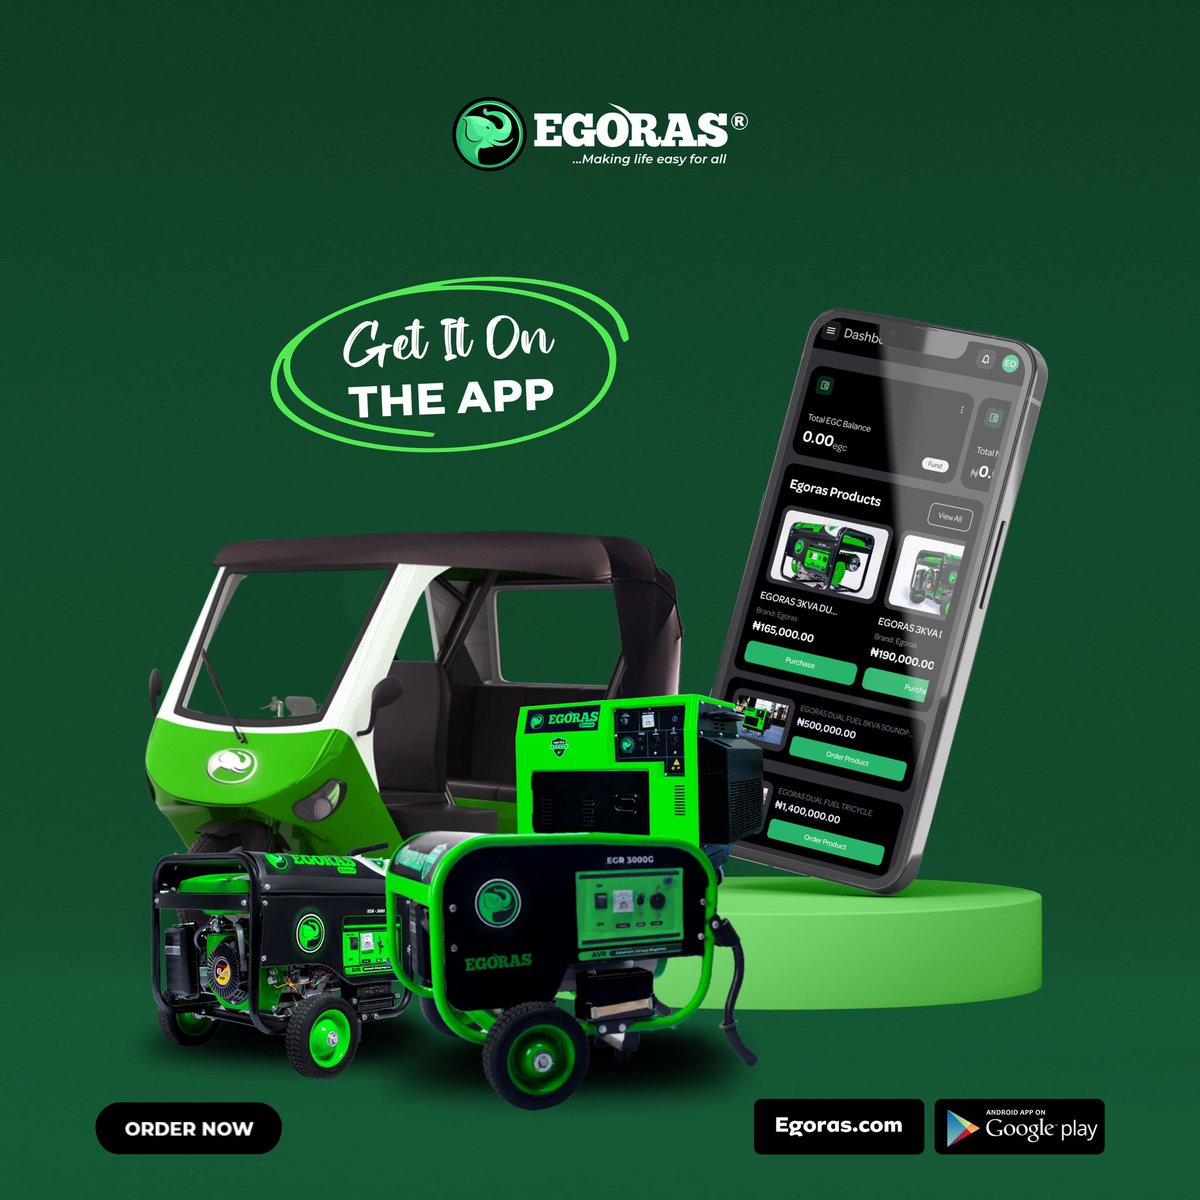 Save big with Egoras!
Make secure payments with the Egoras Pay App and enjoy exclusive discounts on Egoras products. Shop now and start saving!
Download the app today at egoras.com
Need help? Call or chat us on WhatsApp: 09123183924
#DualFuel #EgorasPay